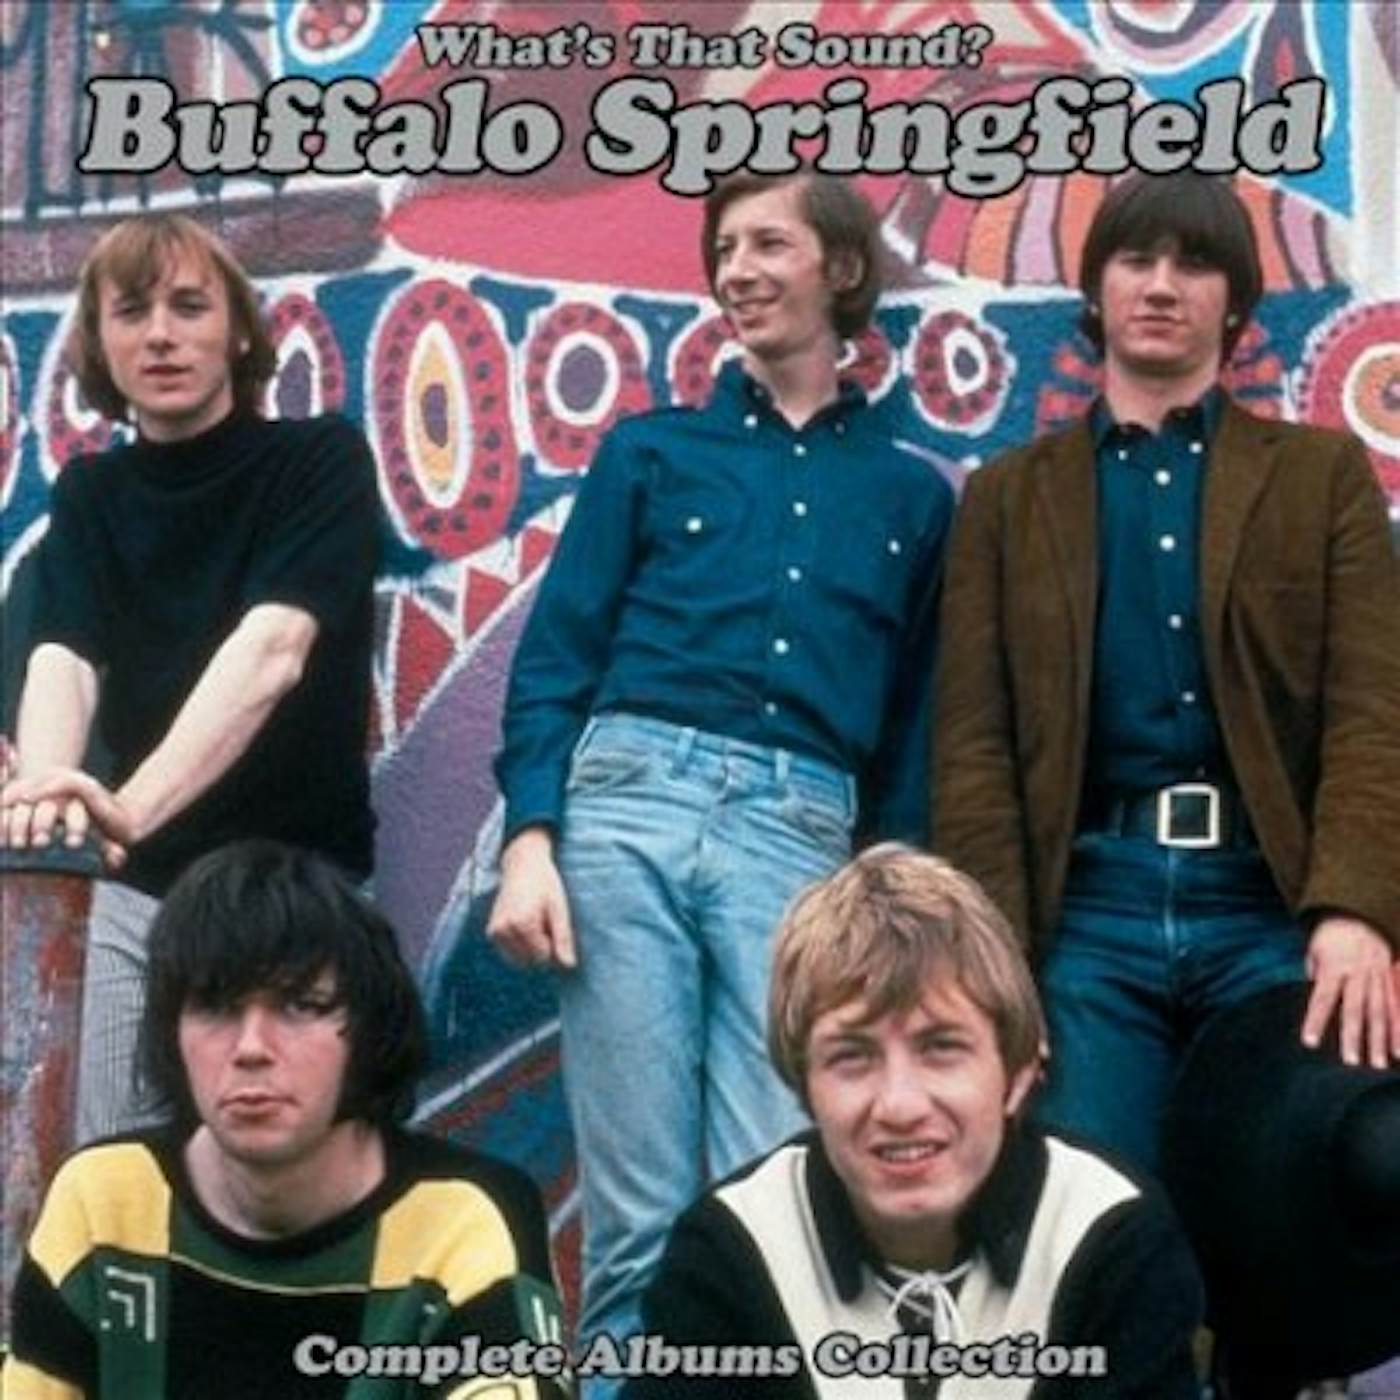 Buffalo Springfield What's That Sound? Complete Albums Collection CD